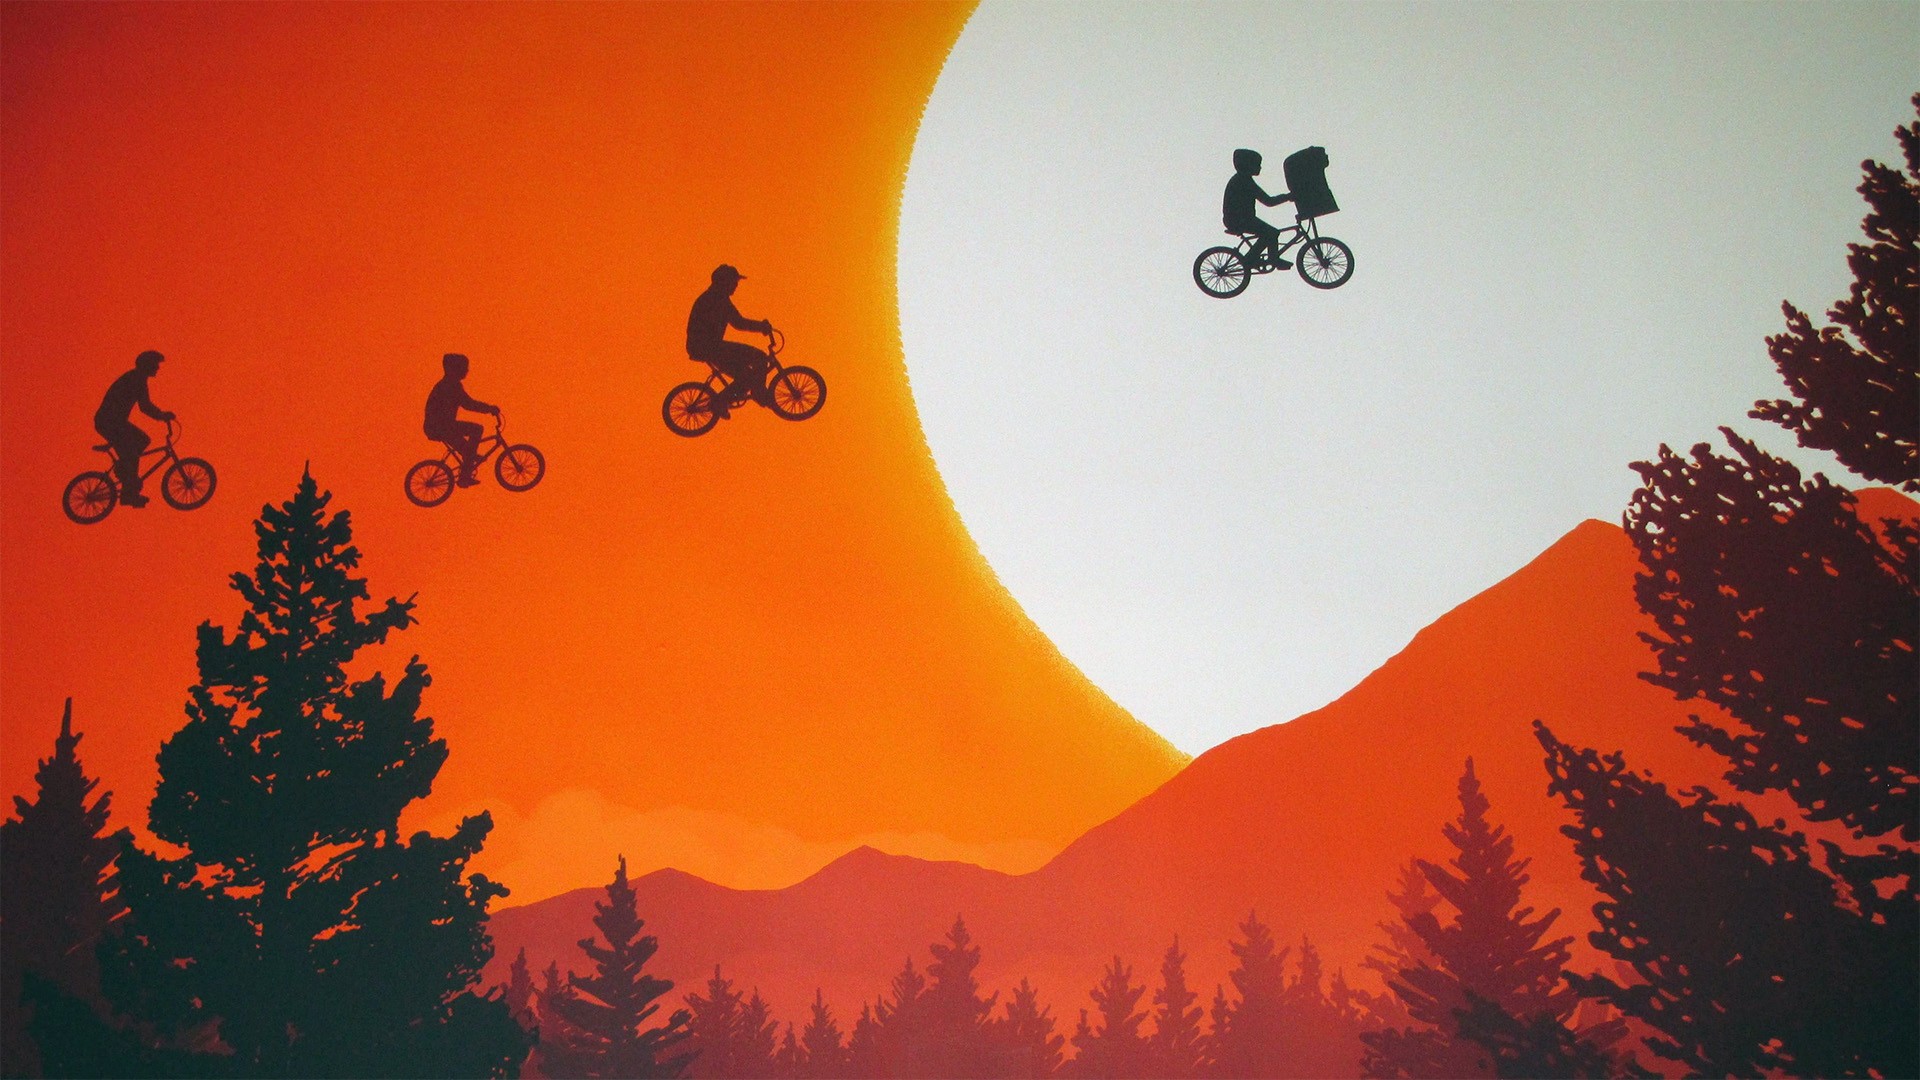 E T Movies Sunset Bicycle Steven Spielberg 1920x1080